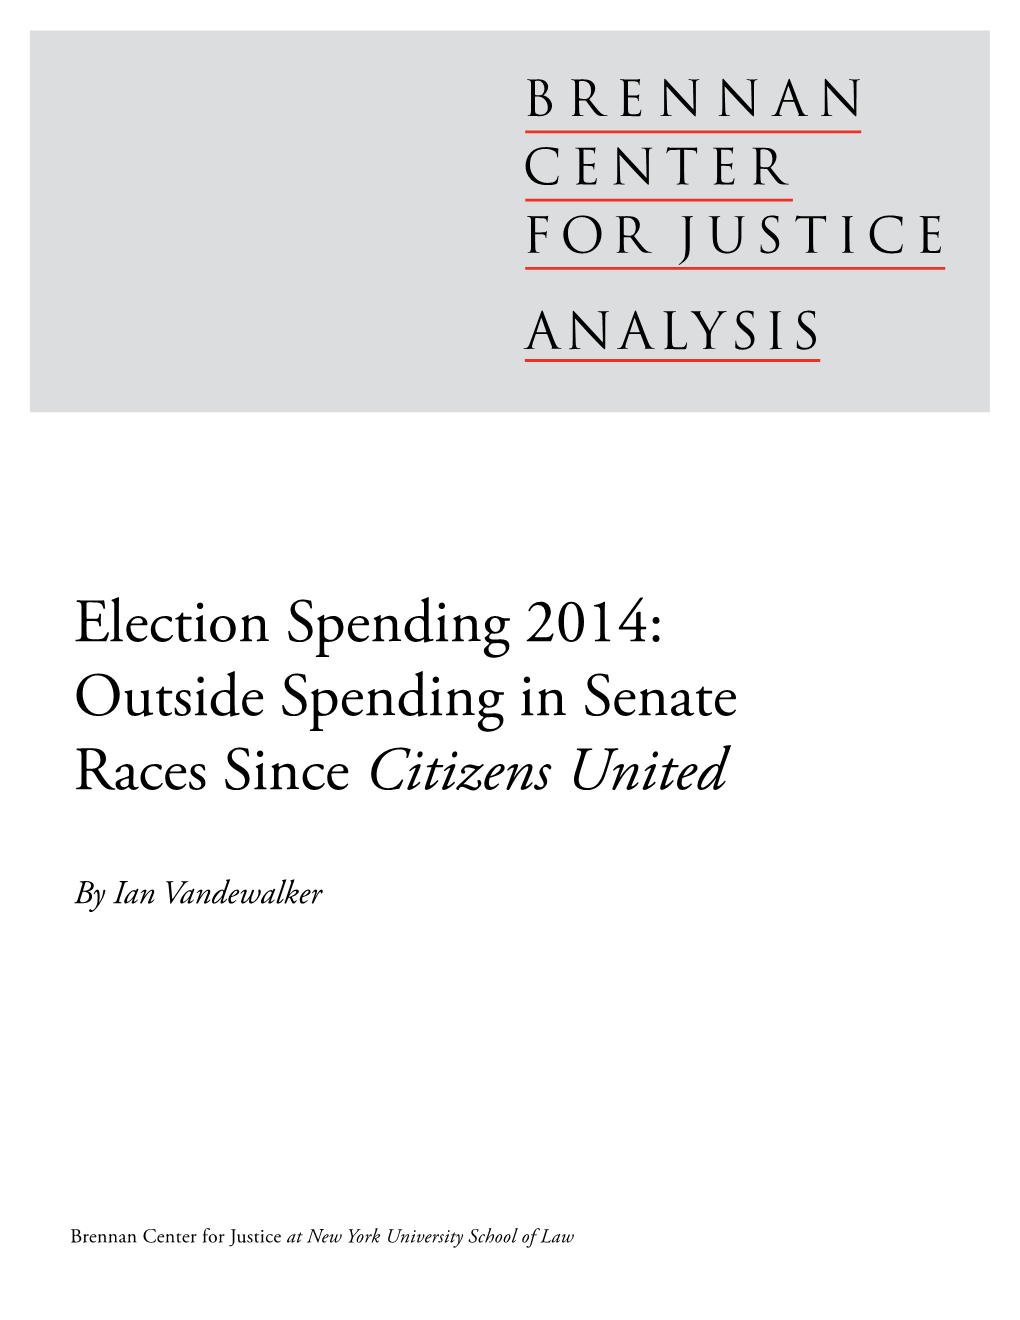 Outside Spending in Senate Races Since Citizens United